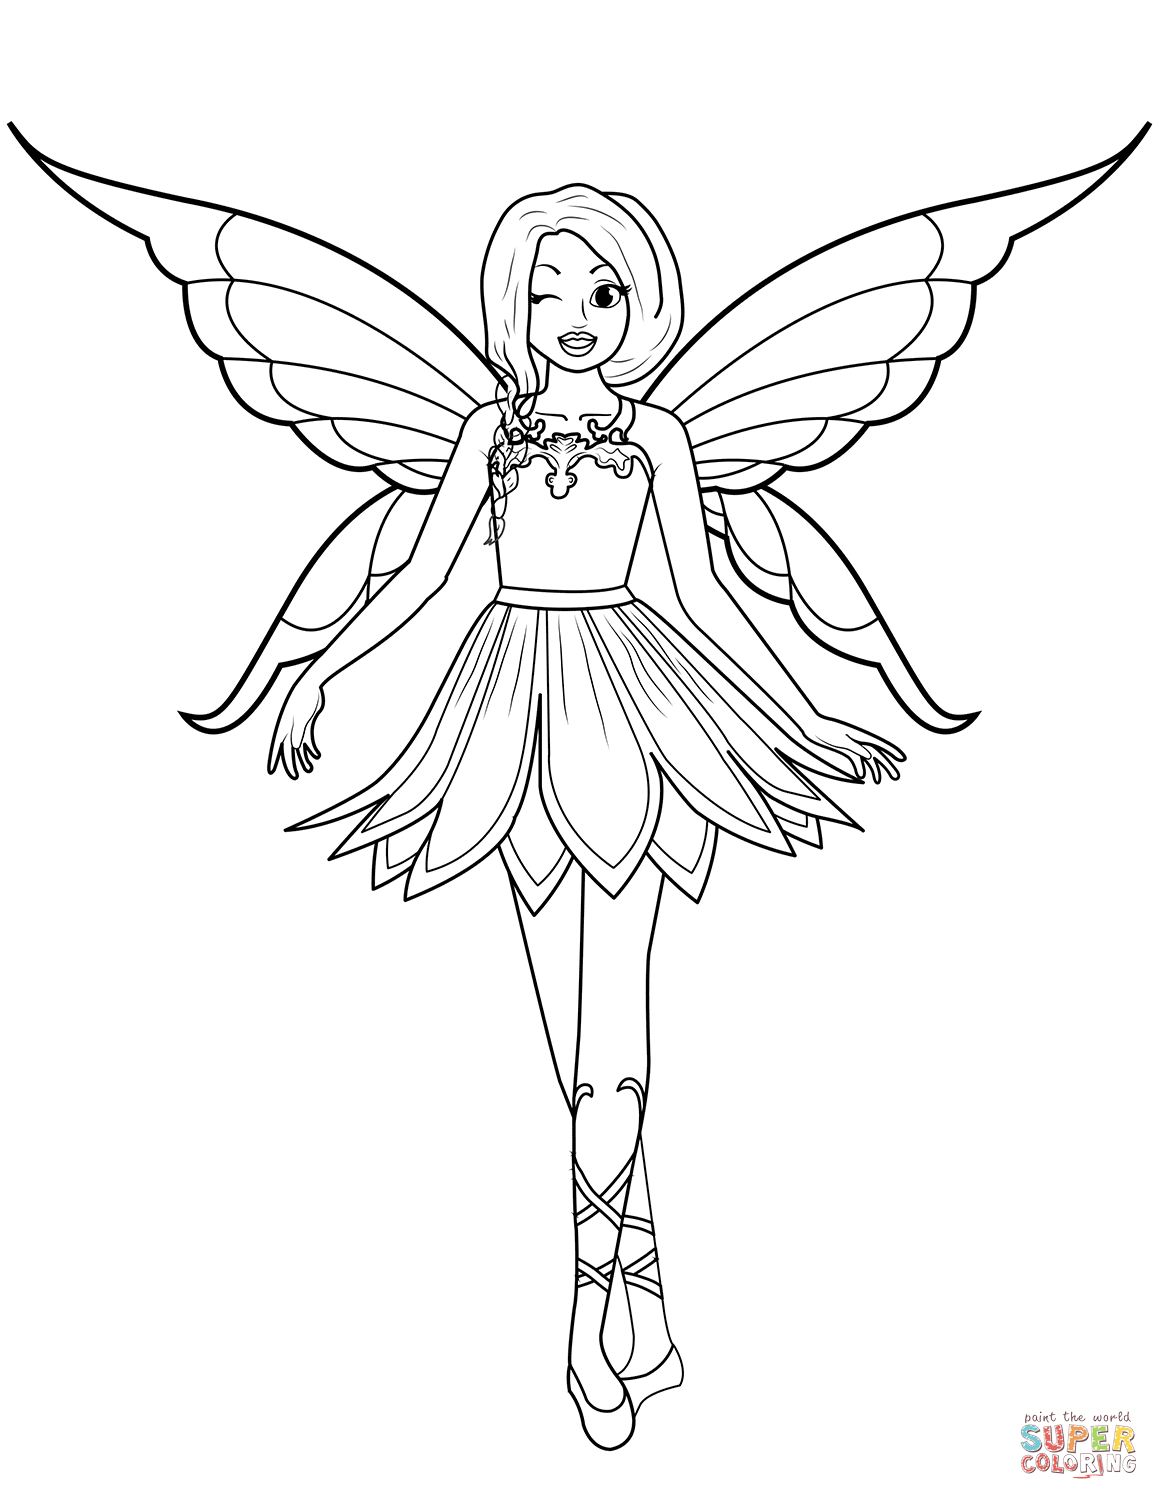 Winking fairy coloring page free printable coloring pages